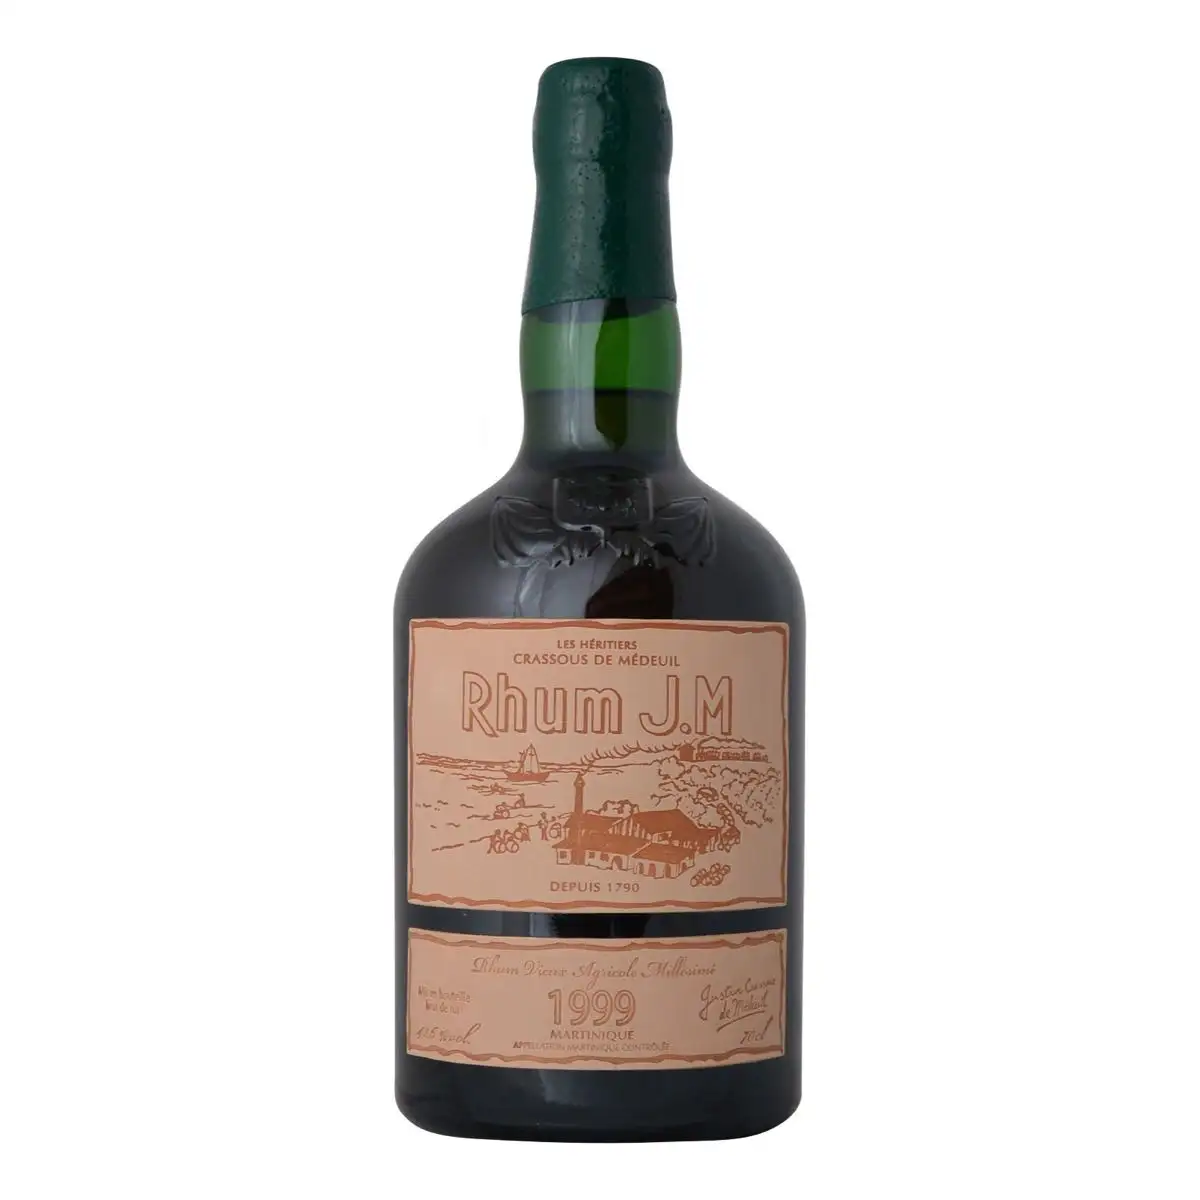 Image of the front of the bottle of the rum 1999